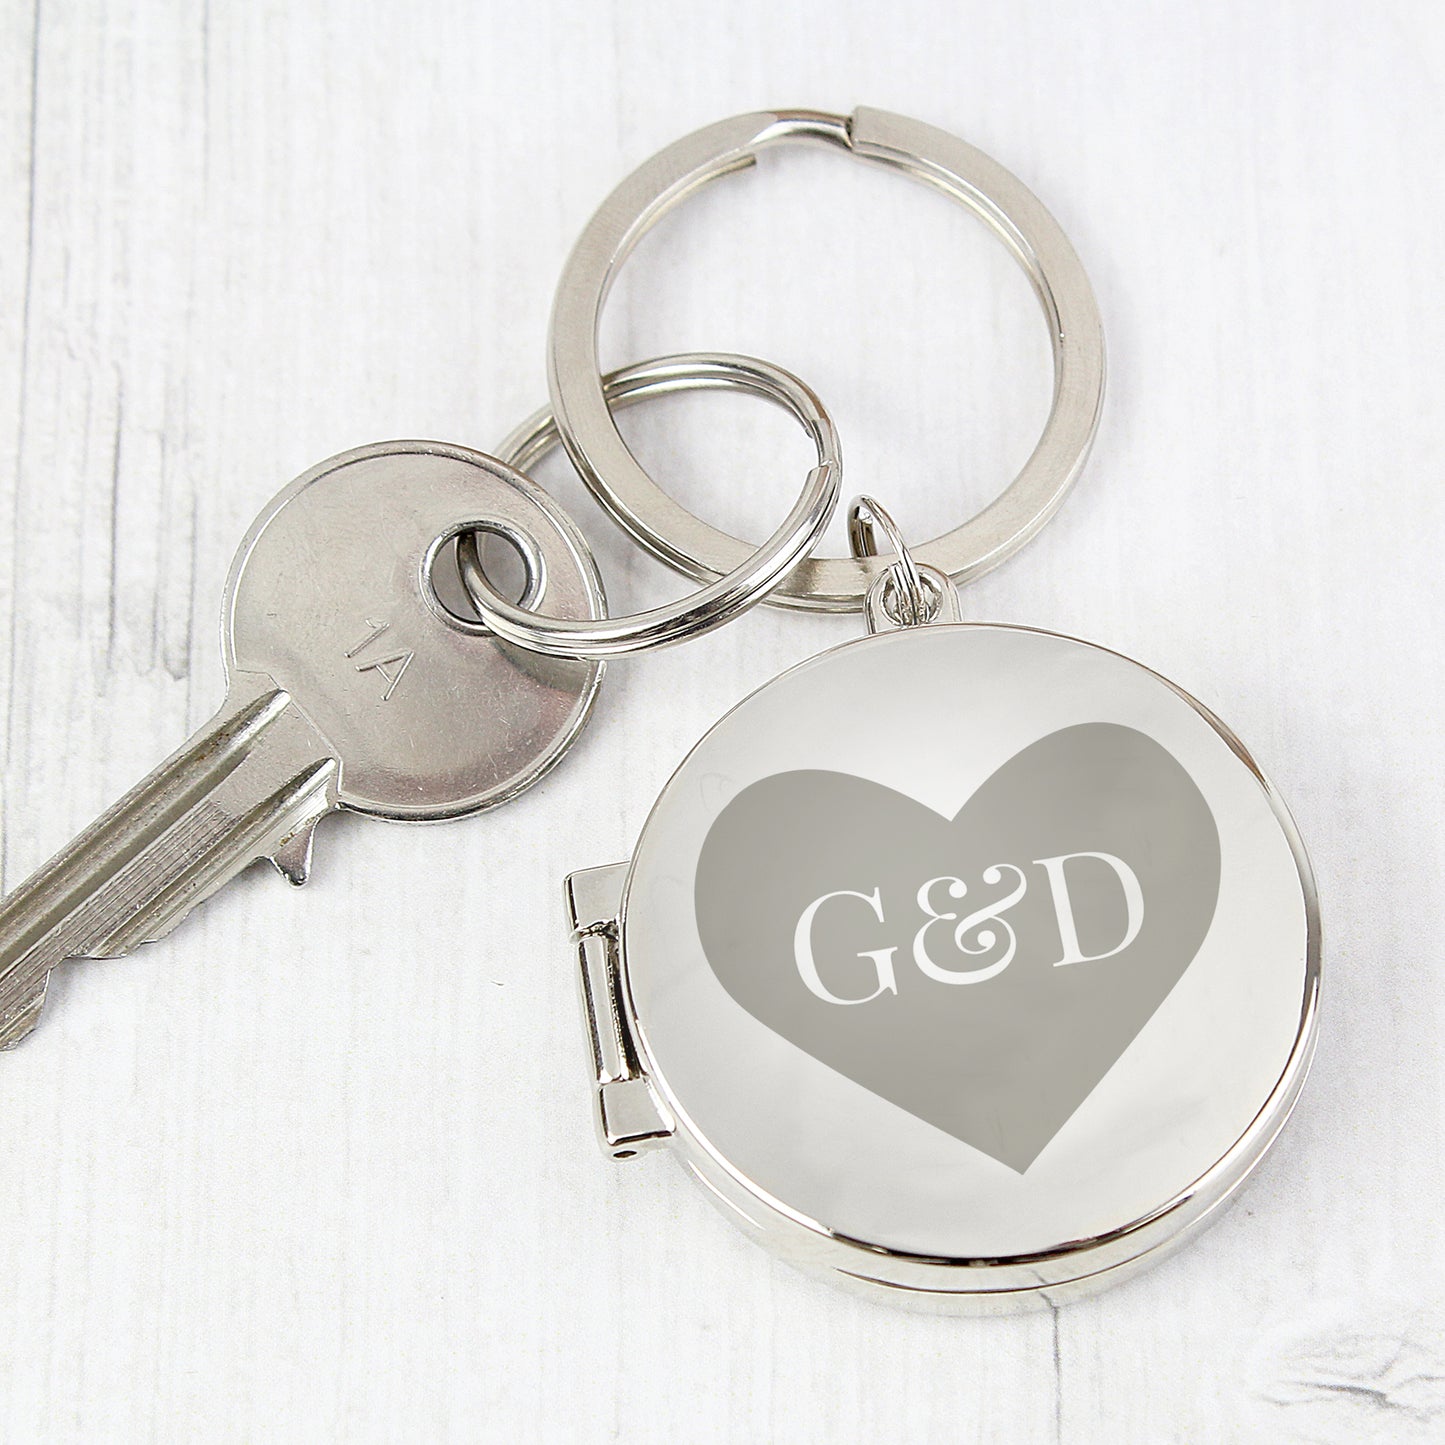 Round locket key ring. The heart motif on the front includes two initials of the couple. The locket opens to take two photos.